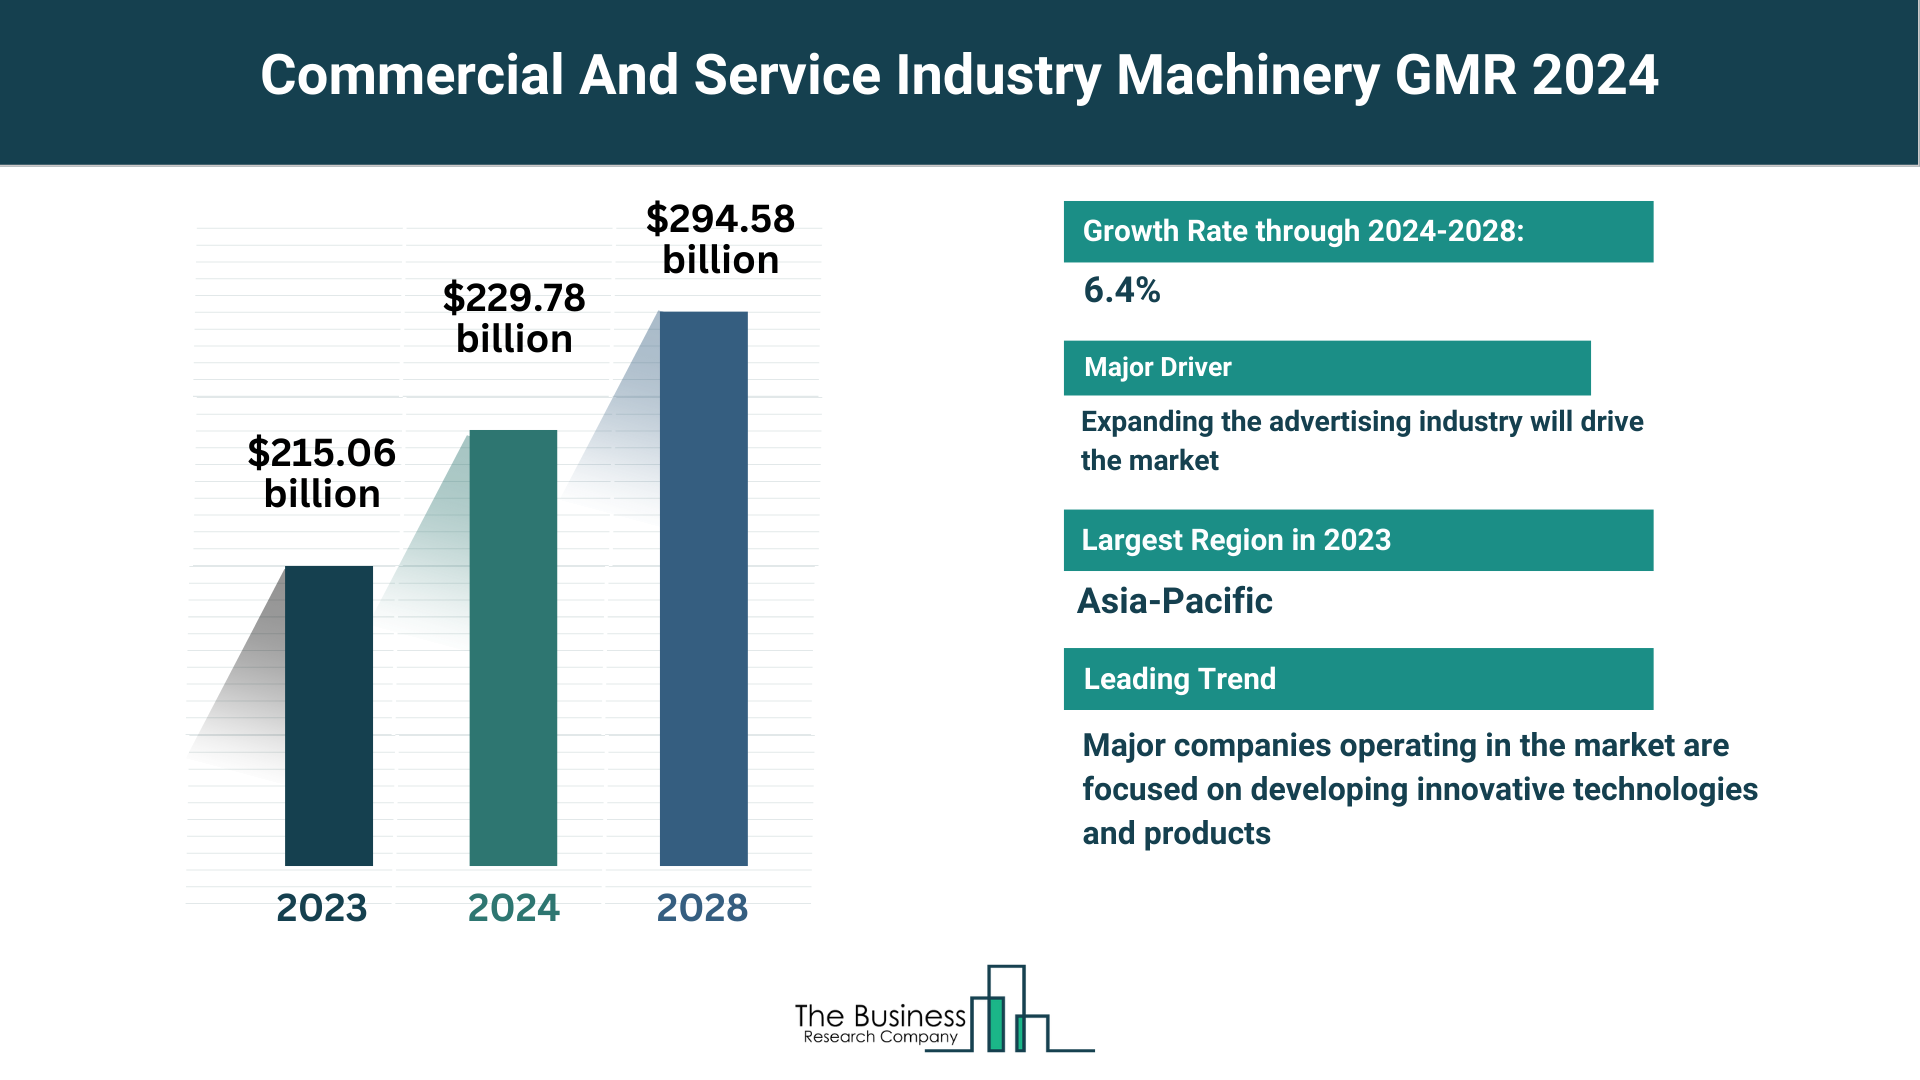 Global Commercial And Service Industry Machinery Market